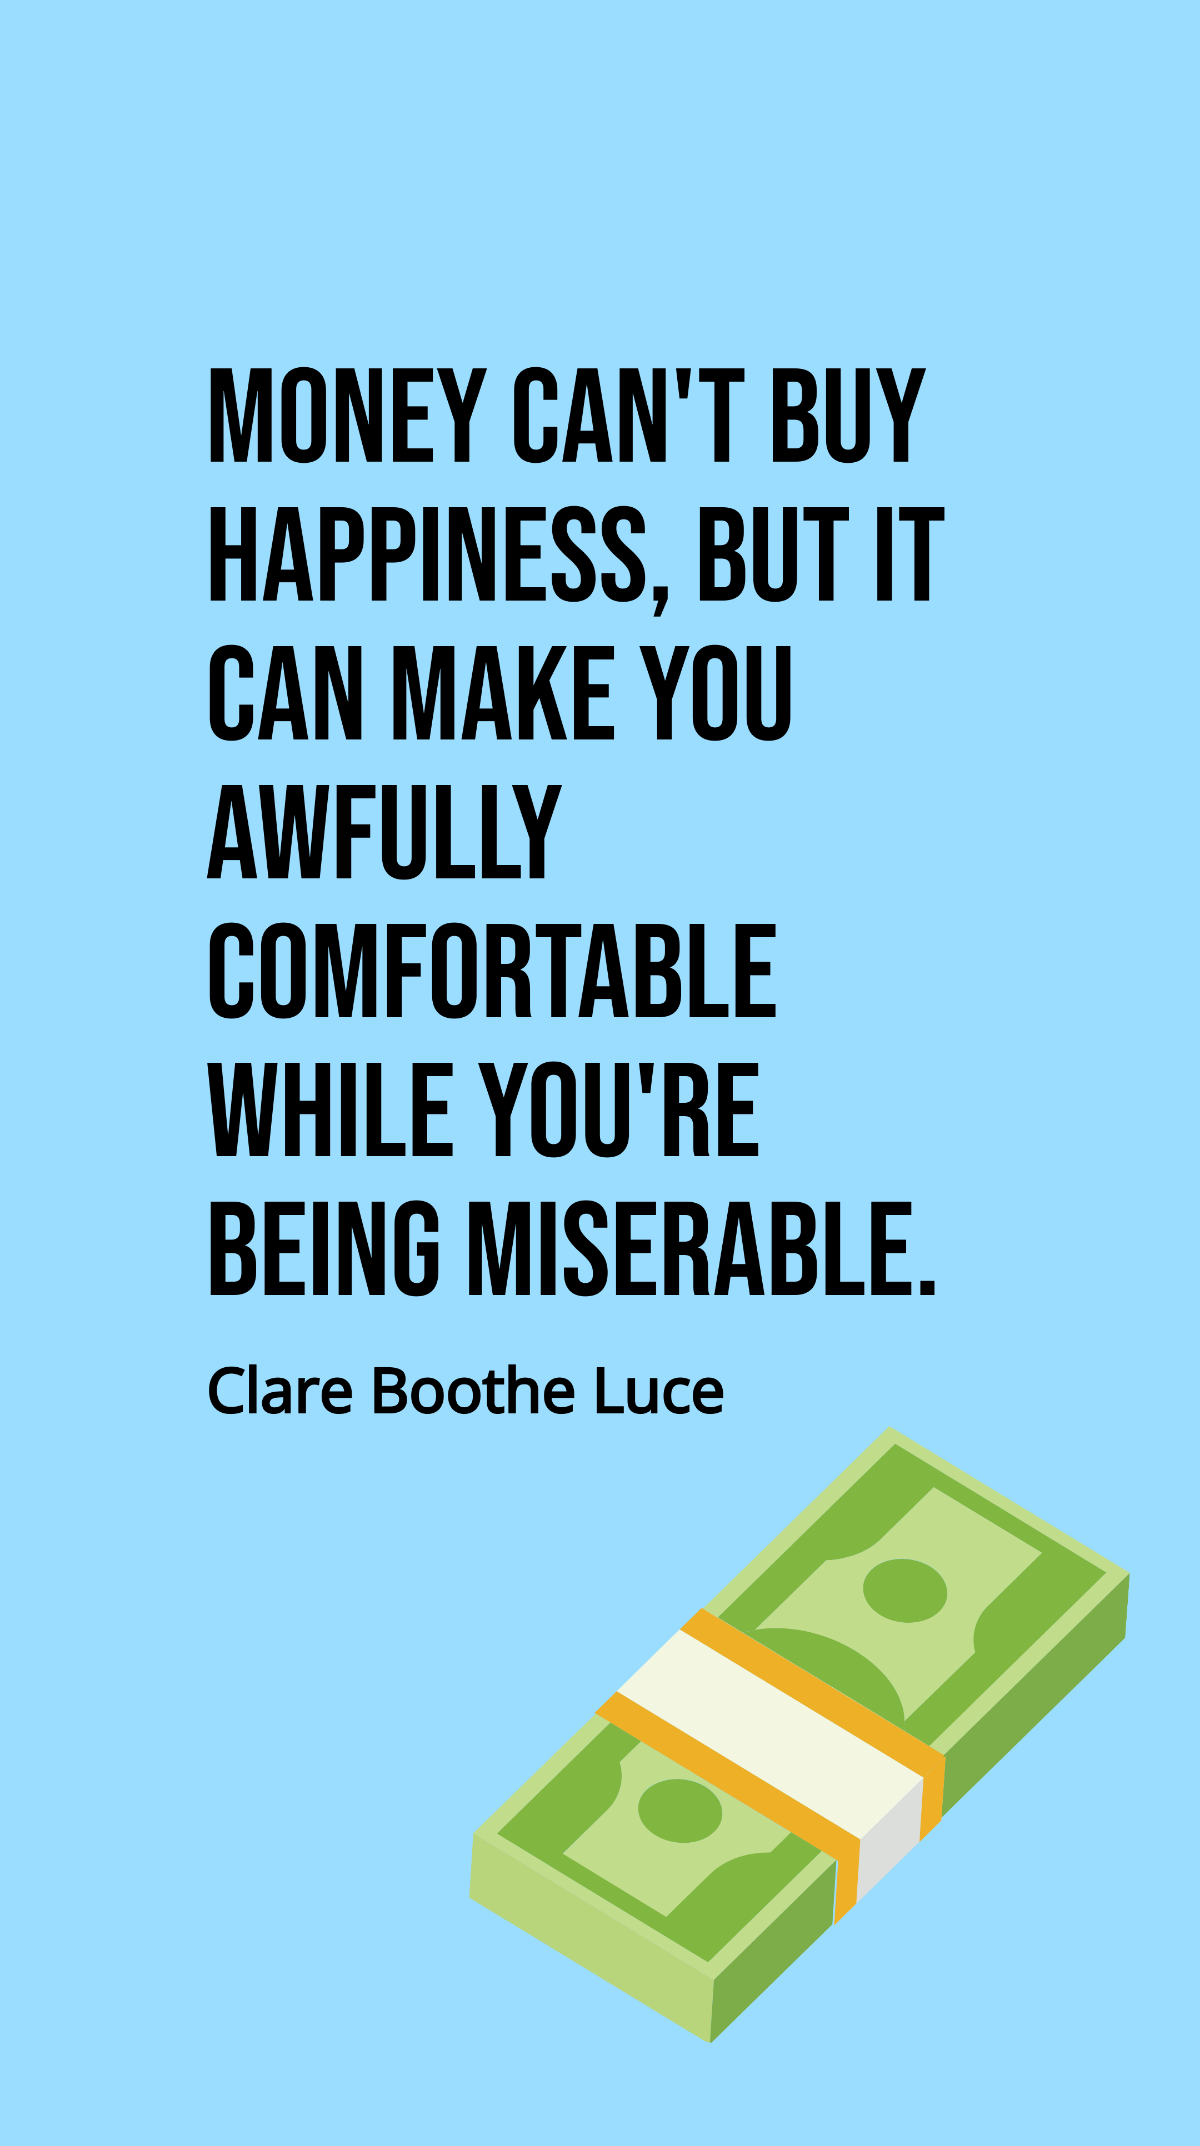 Clare Boothe Luce - Money can't buy happiness, but it can make you awfully comfortable while you're being miserable. Template